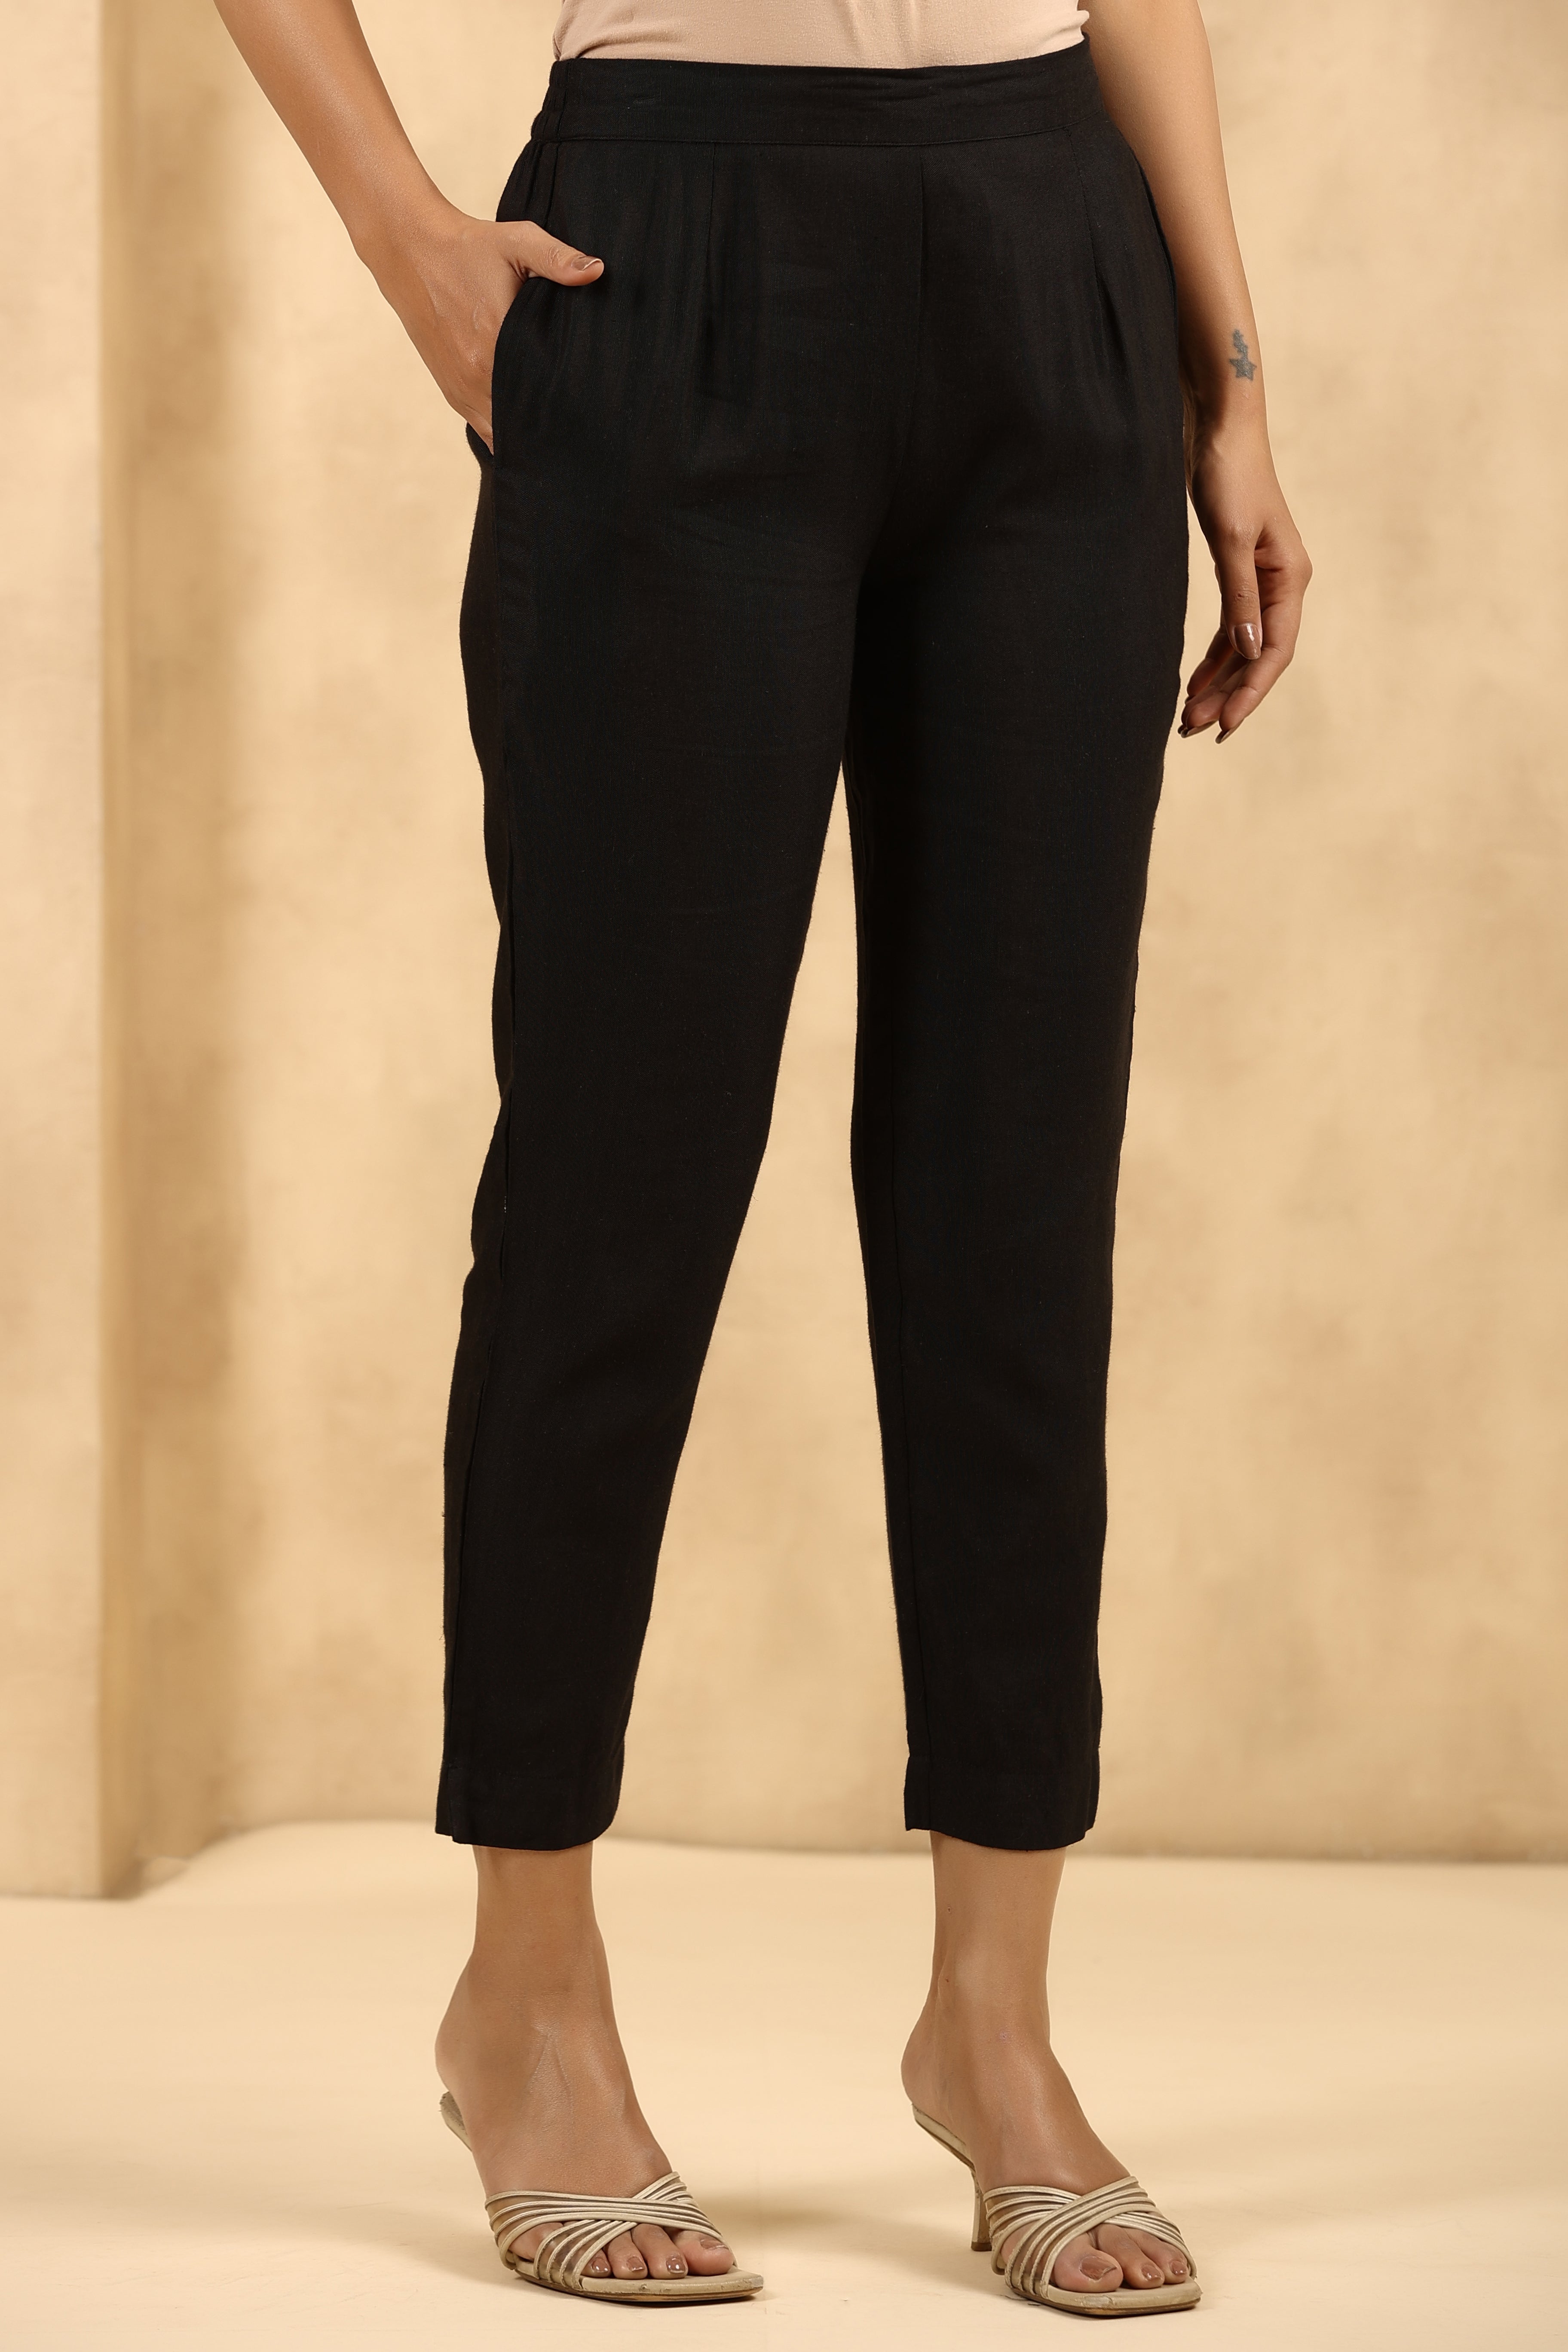 Juniper  Black Rayon Flex Solid Slim Fit Pants With Partially Elasticated Waistband